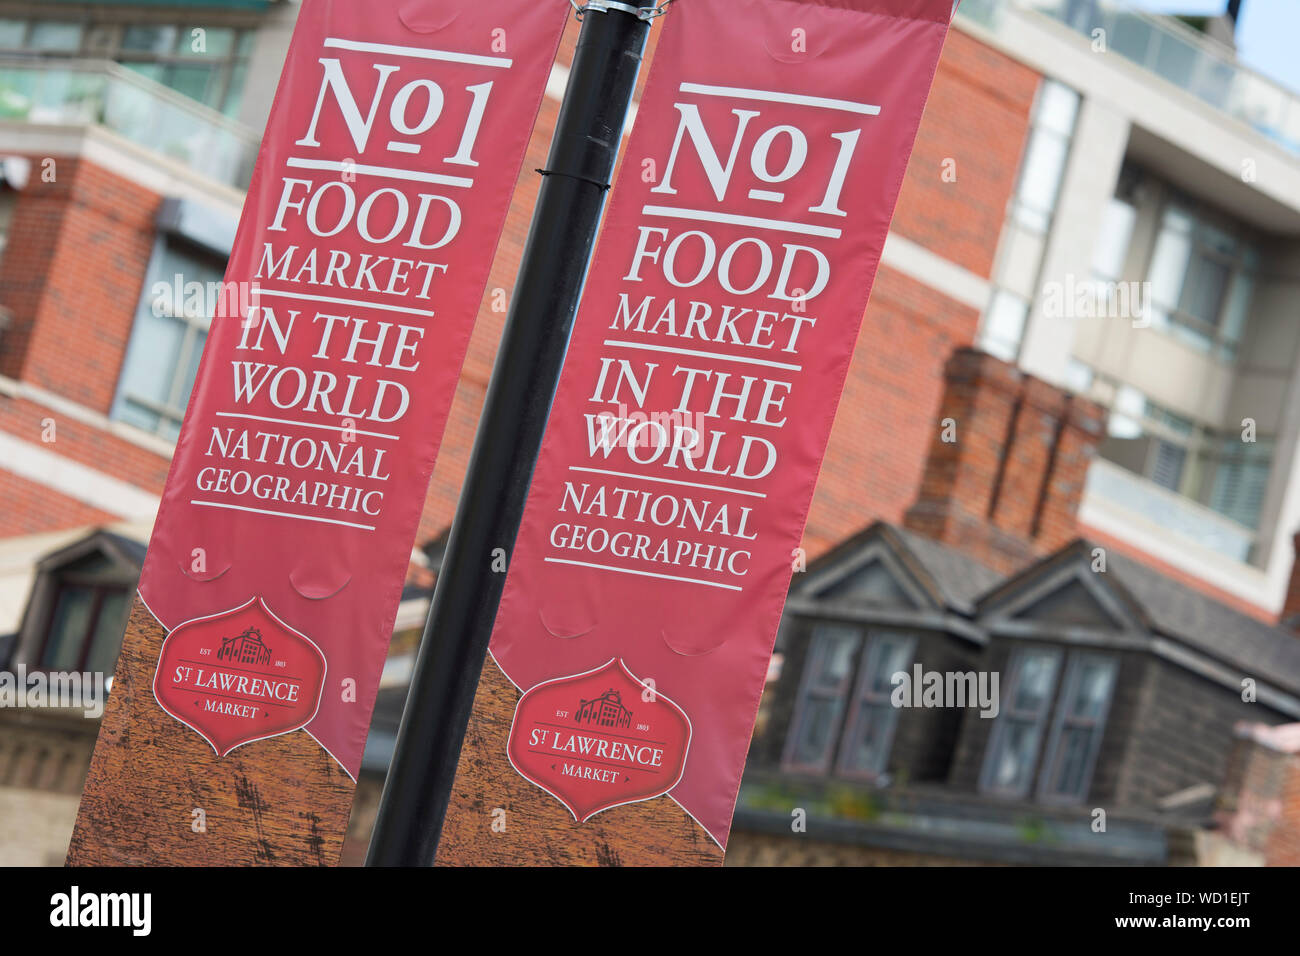 St. Lawrence Market Sign, Banner, No 1, Food Market in the World, Toronto, Ontario, Canada Stock Photo